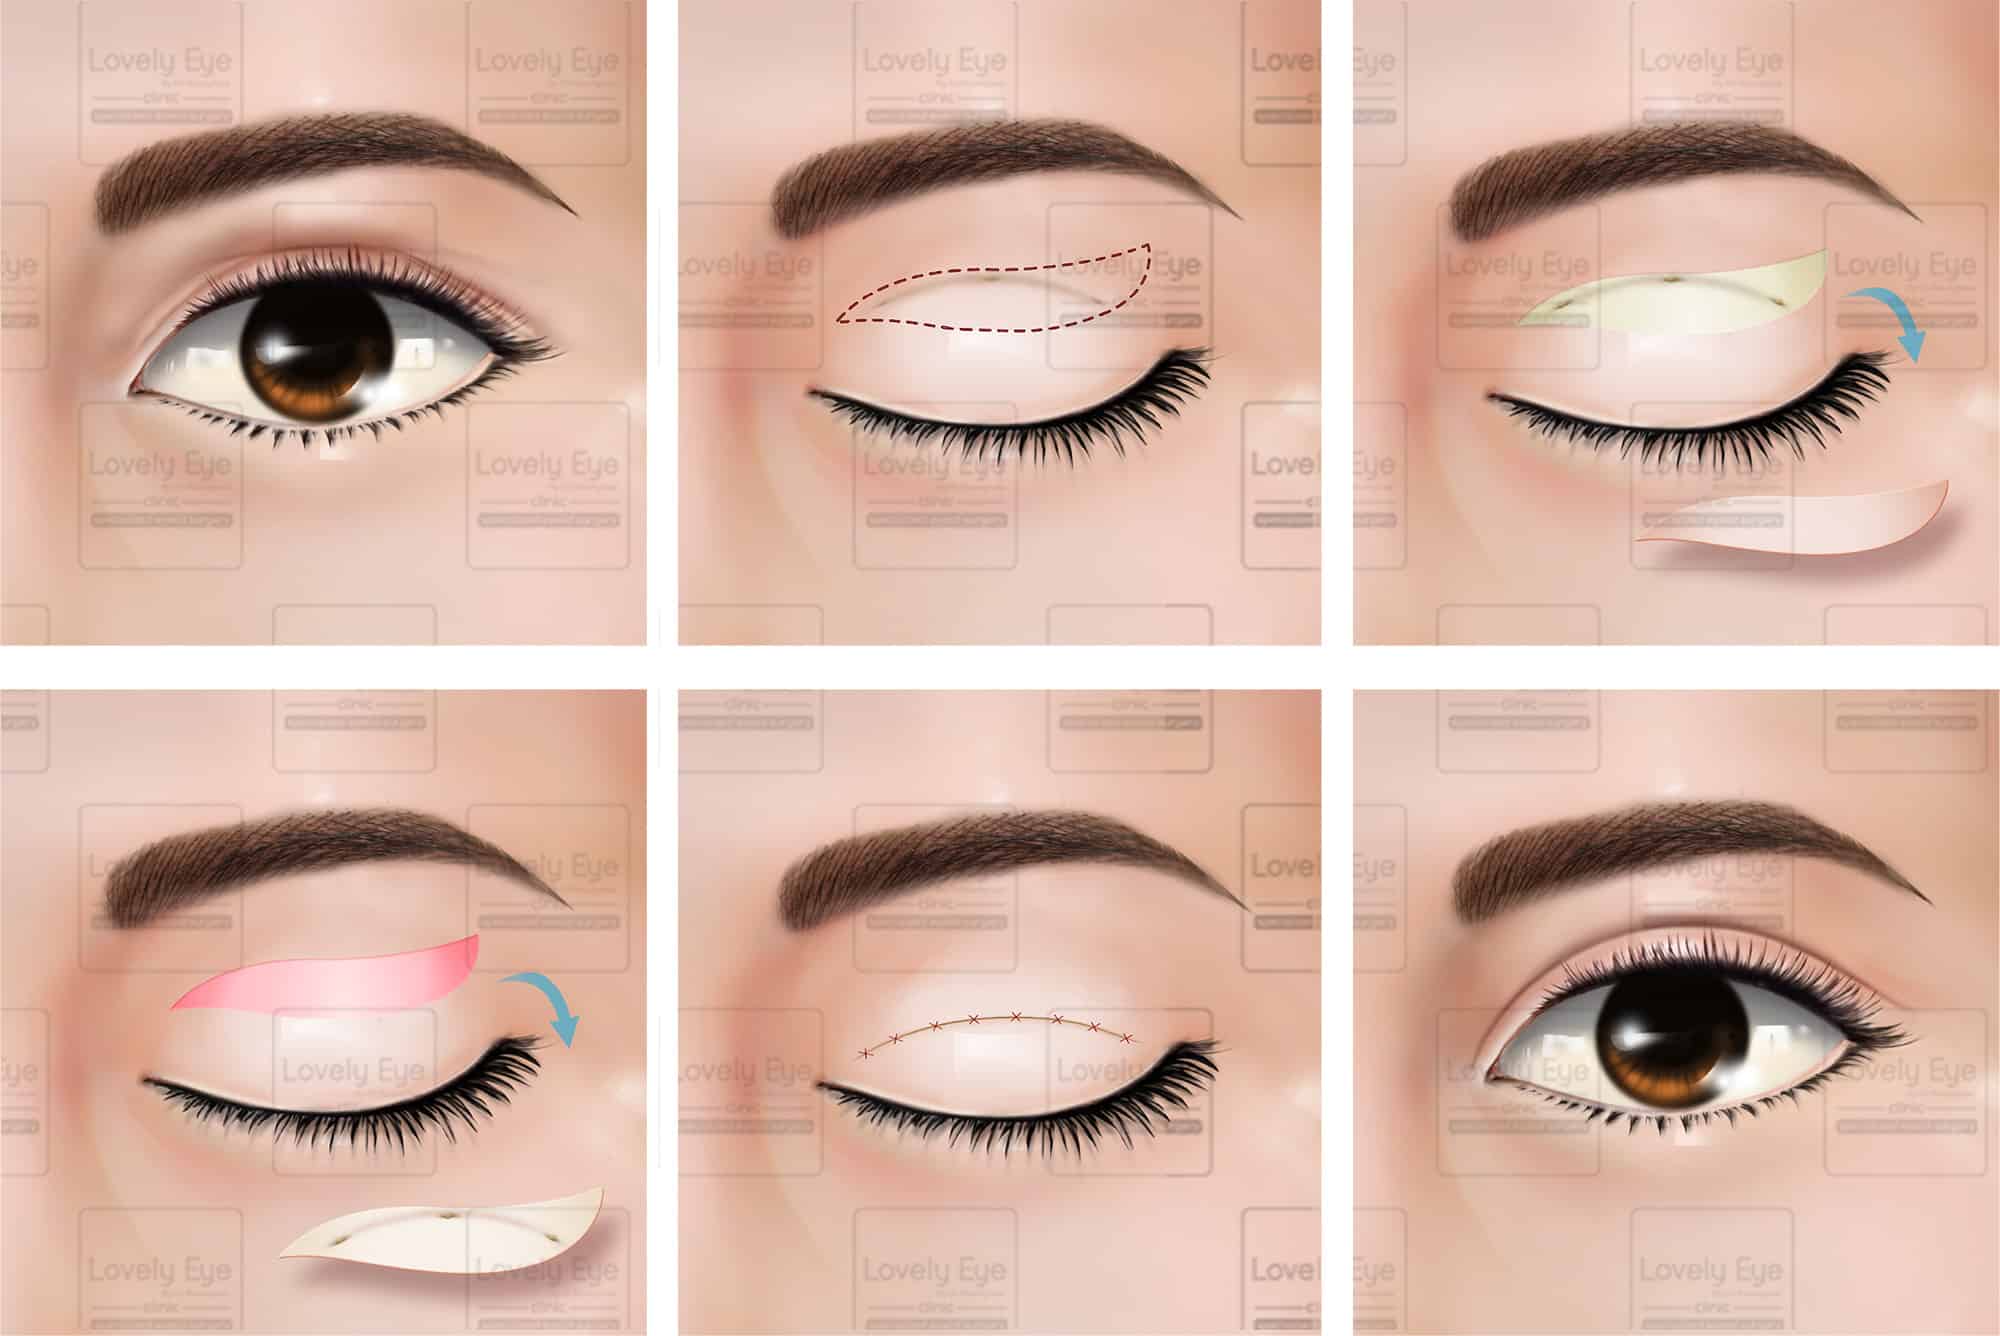 Double eyelid correction technique Dr.Roungkaw